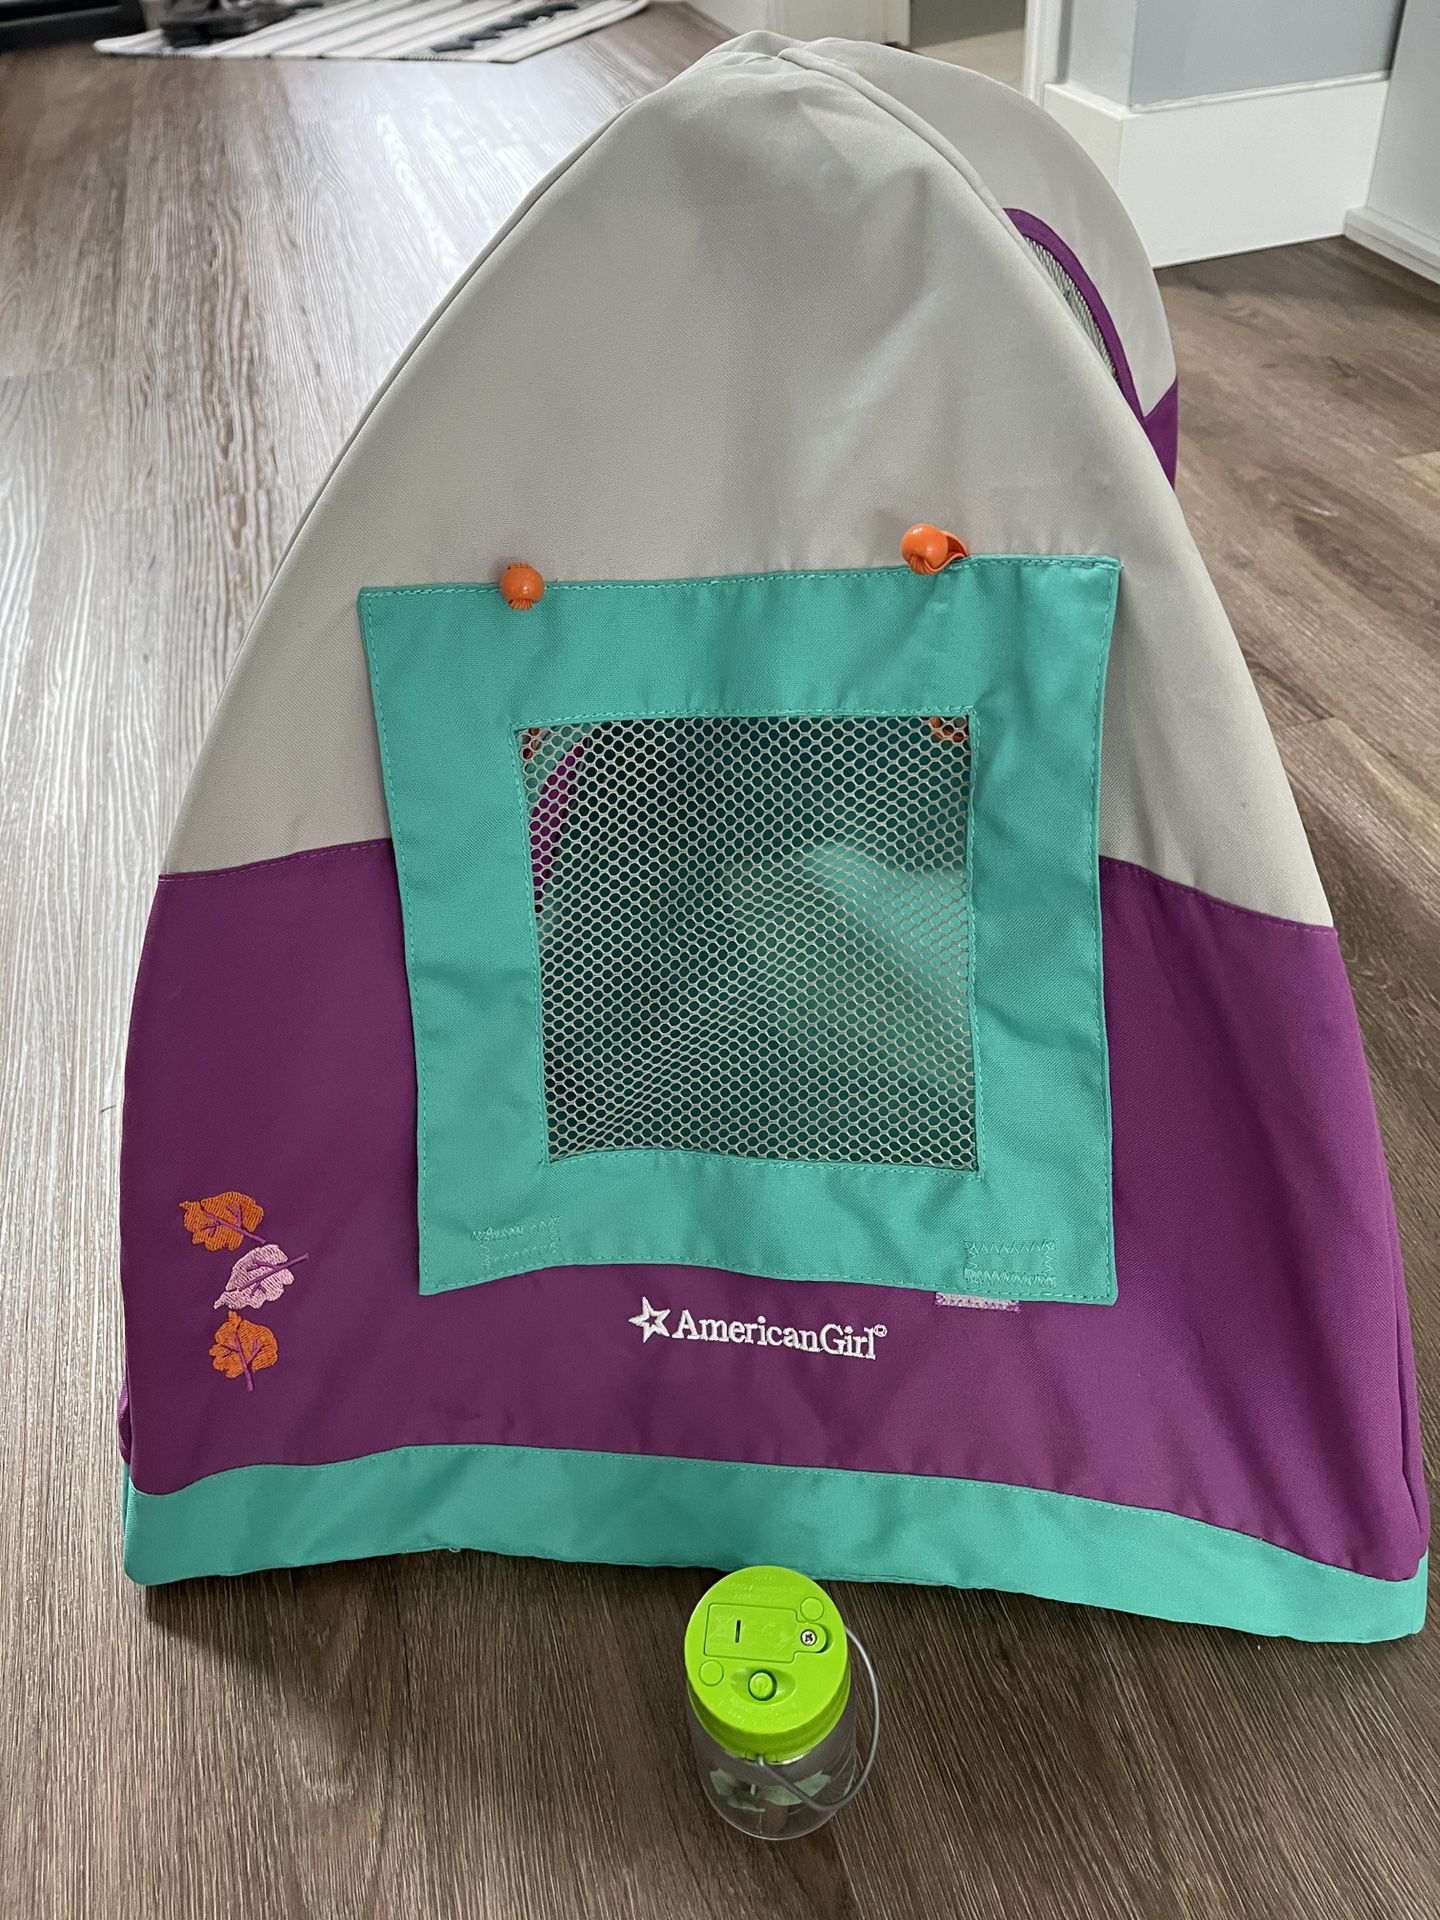 American Girl Doll Tent With Lamp That Lights Up